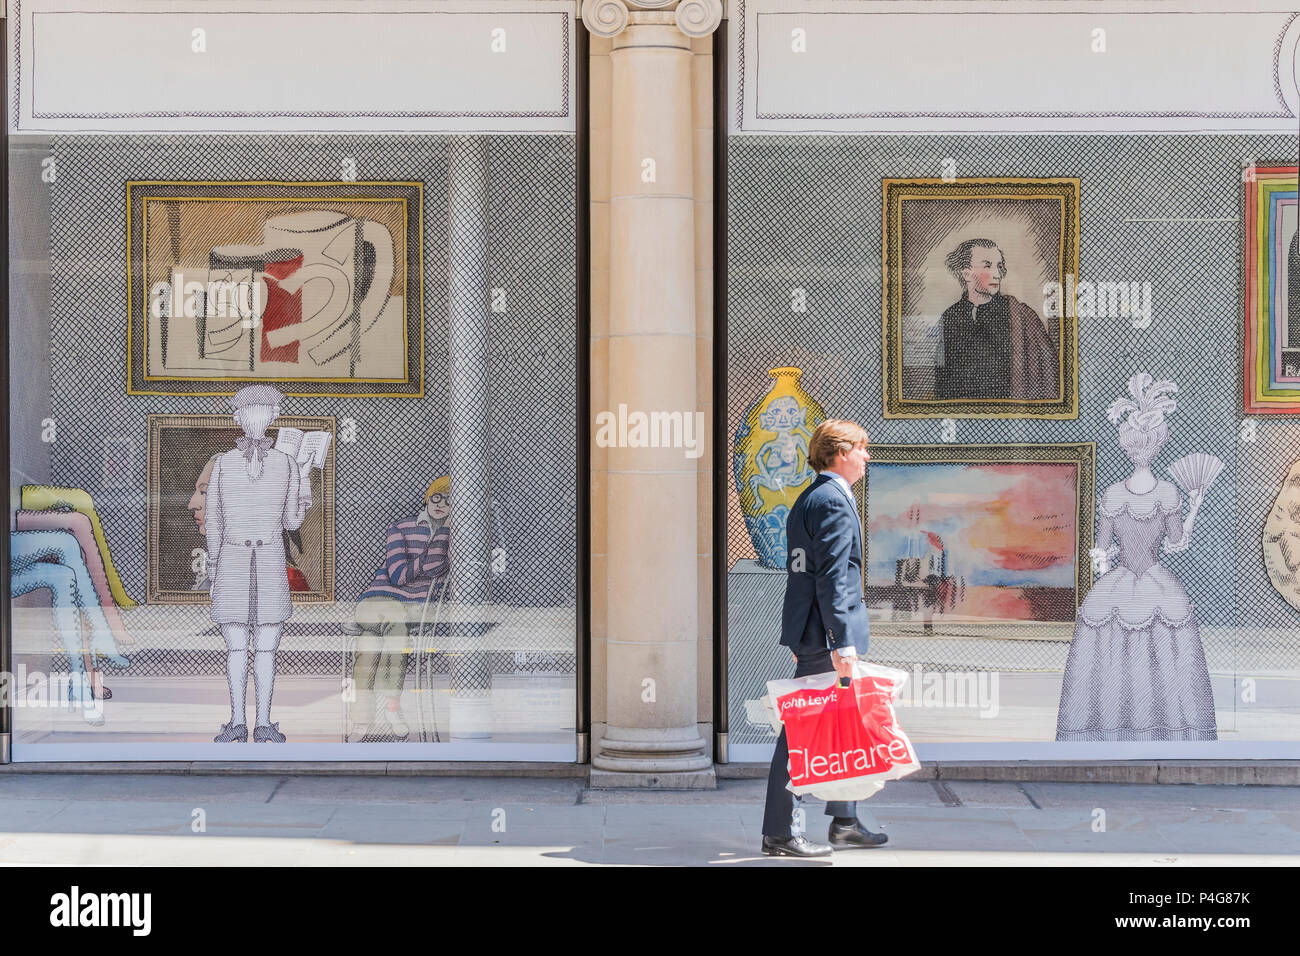 London, UK. 22nd June 2018. Fenwick of Bond Street has commissioned Pierre Le-Tan, the French illustrator to tell the story of the Royal Academy of Arts 250th Anniversary - Bond Street’s windows transformed into a series art installations -  this is part of Mayfair Art Weekend and coincides with the Royal Academy celebrating its 250th anniversary. Credit: Guy Bell/Alamy Live News Stock Photo